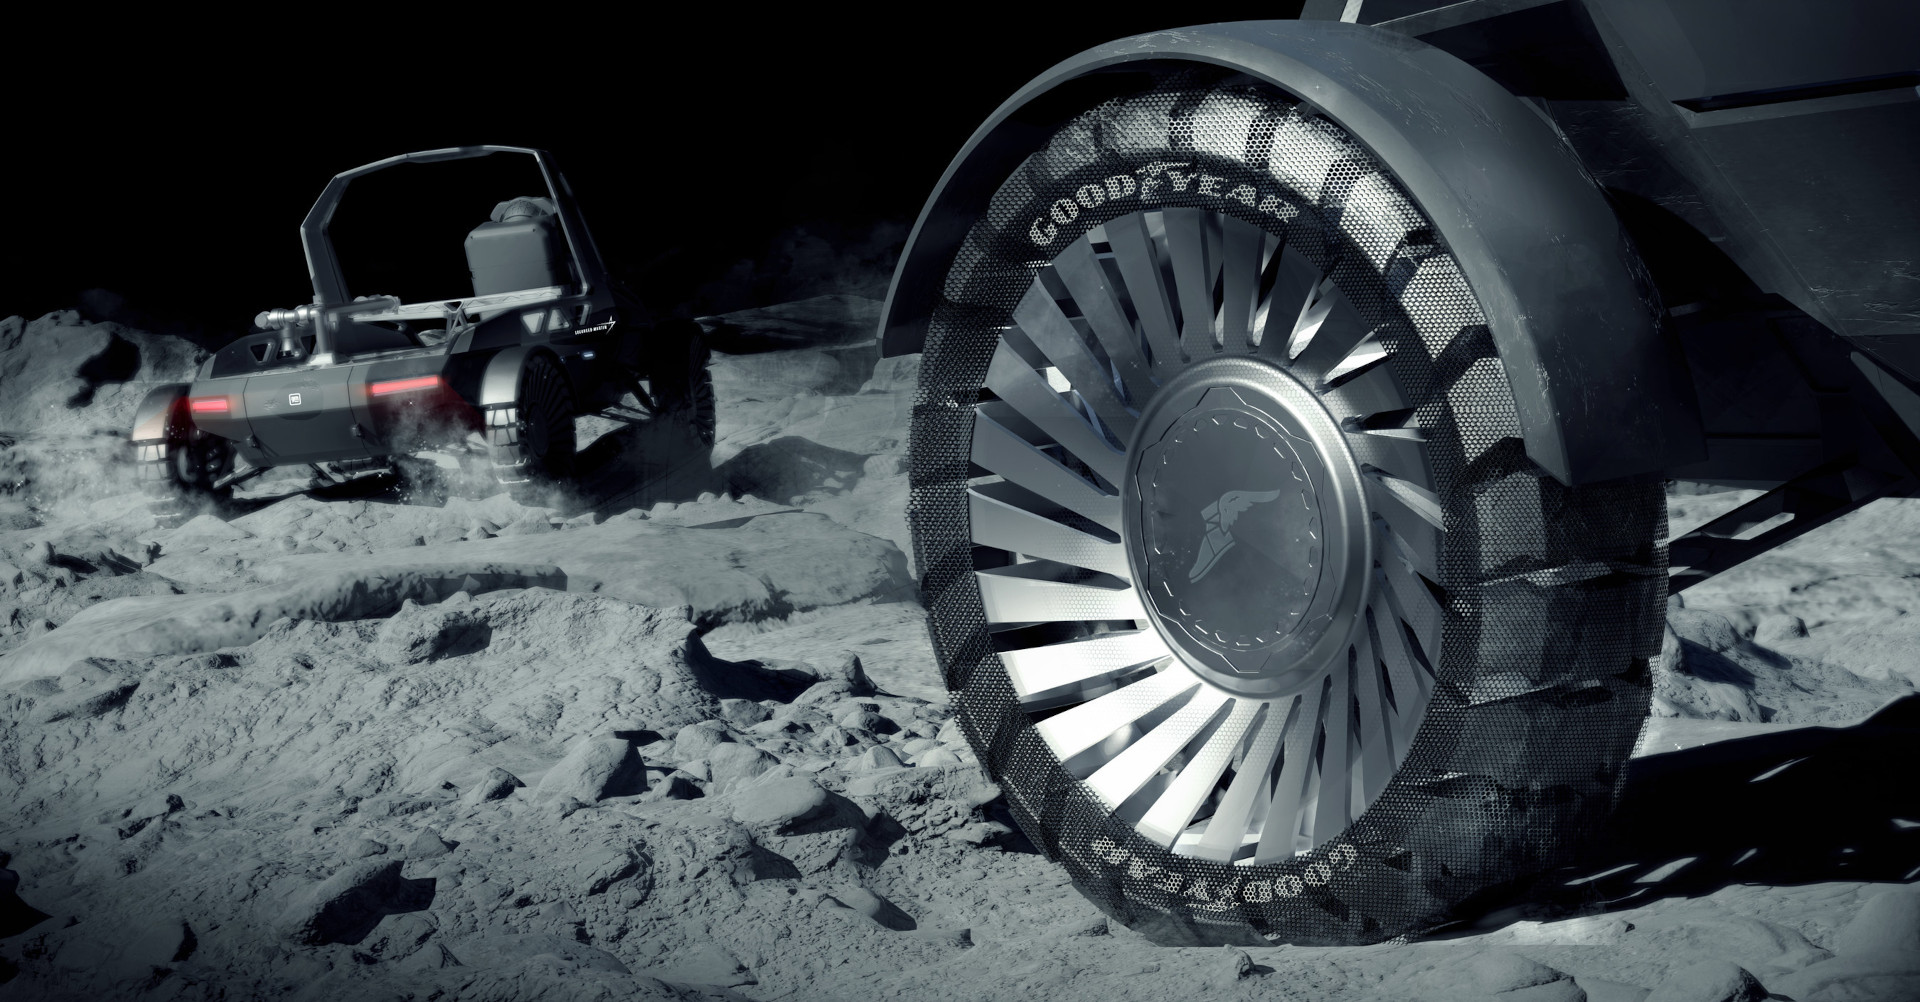 GOODYEAR TO COMMERCIALISE LUNAR MOBILITY